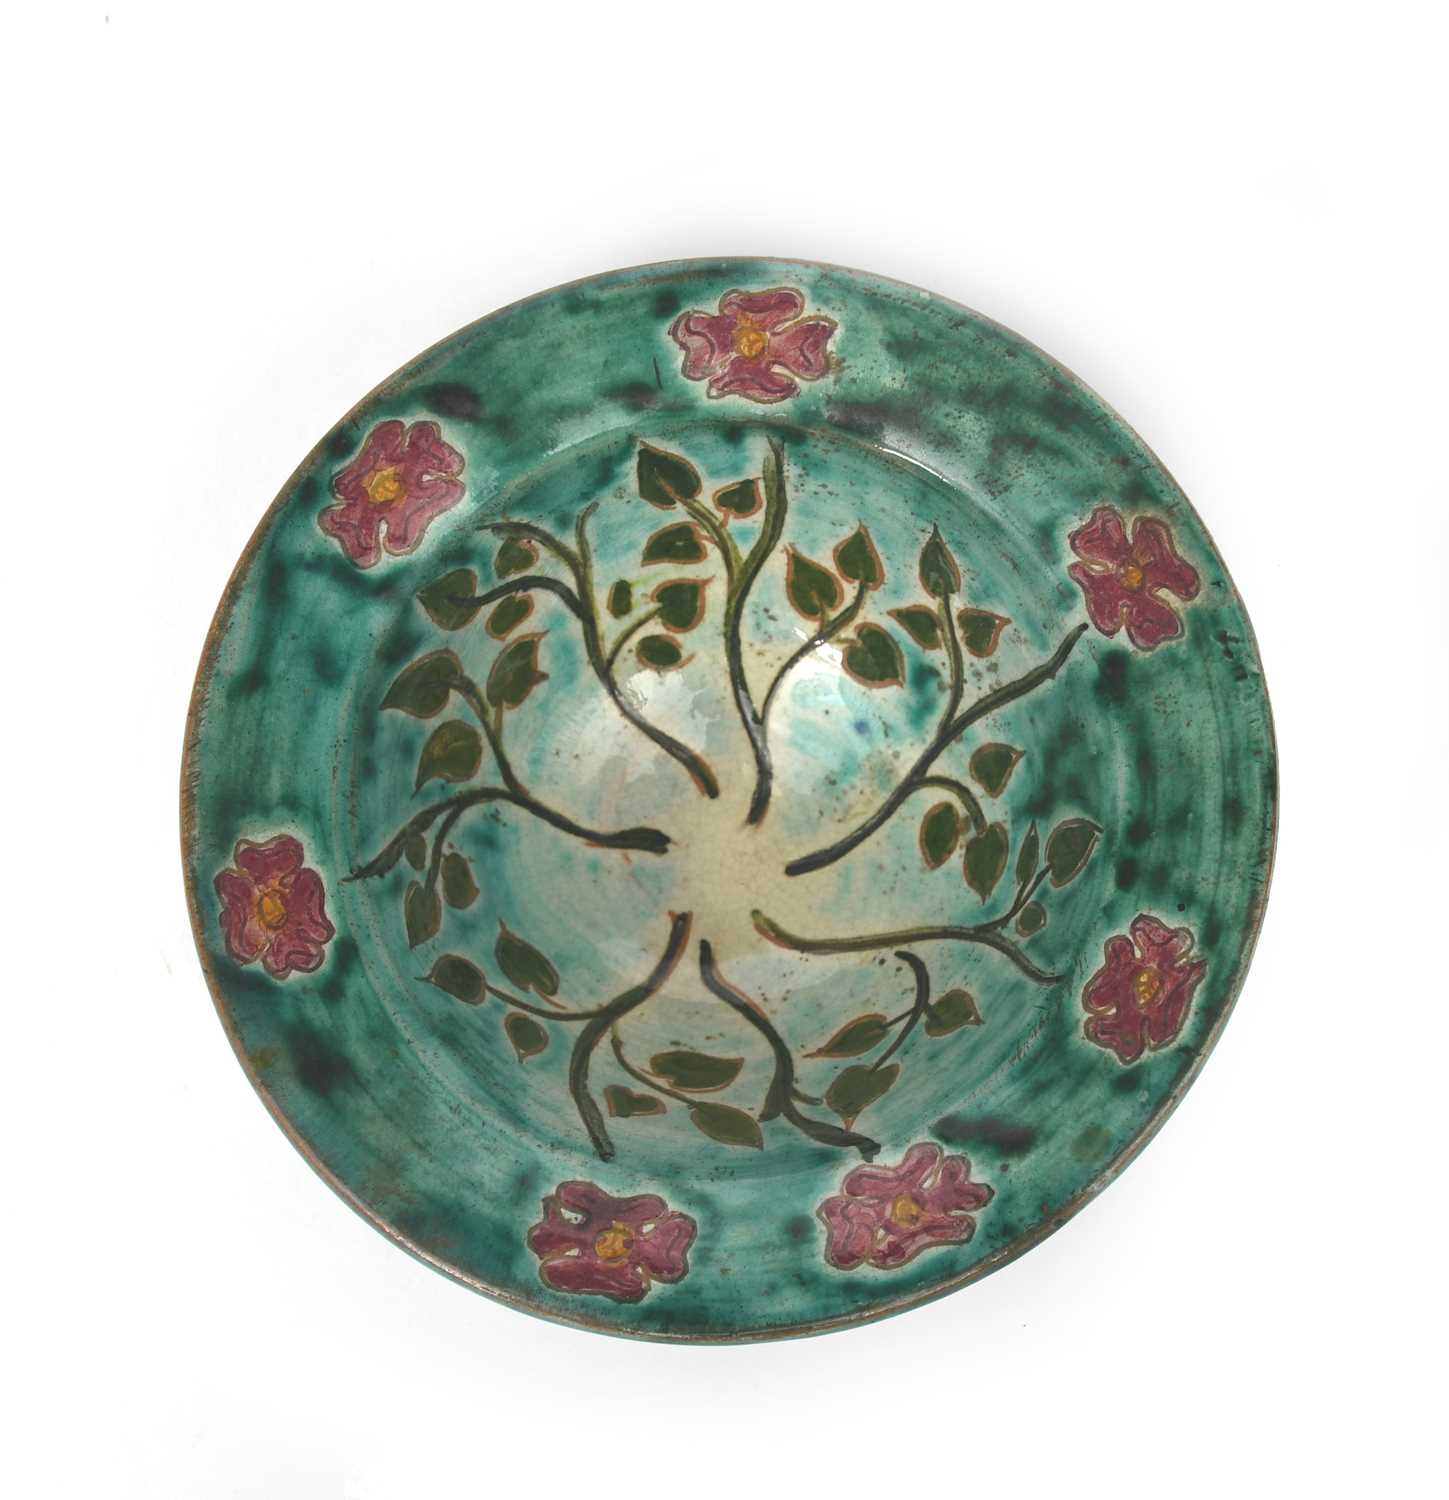 A small Della Robbia Pottery bowl by Tom Hall, painted with radiating flower stems in red and